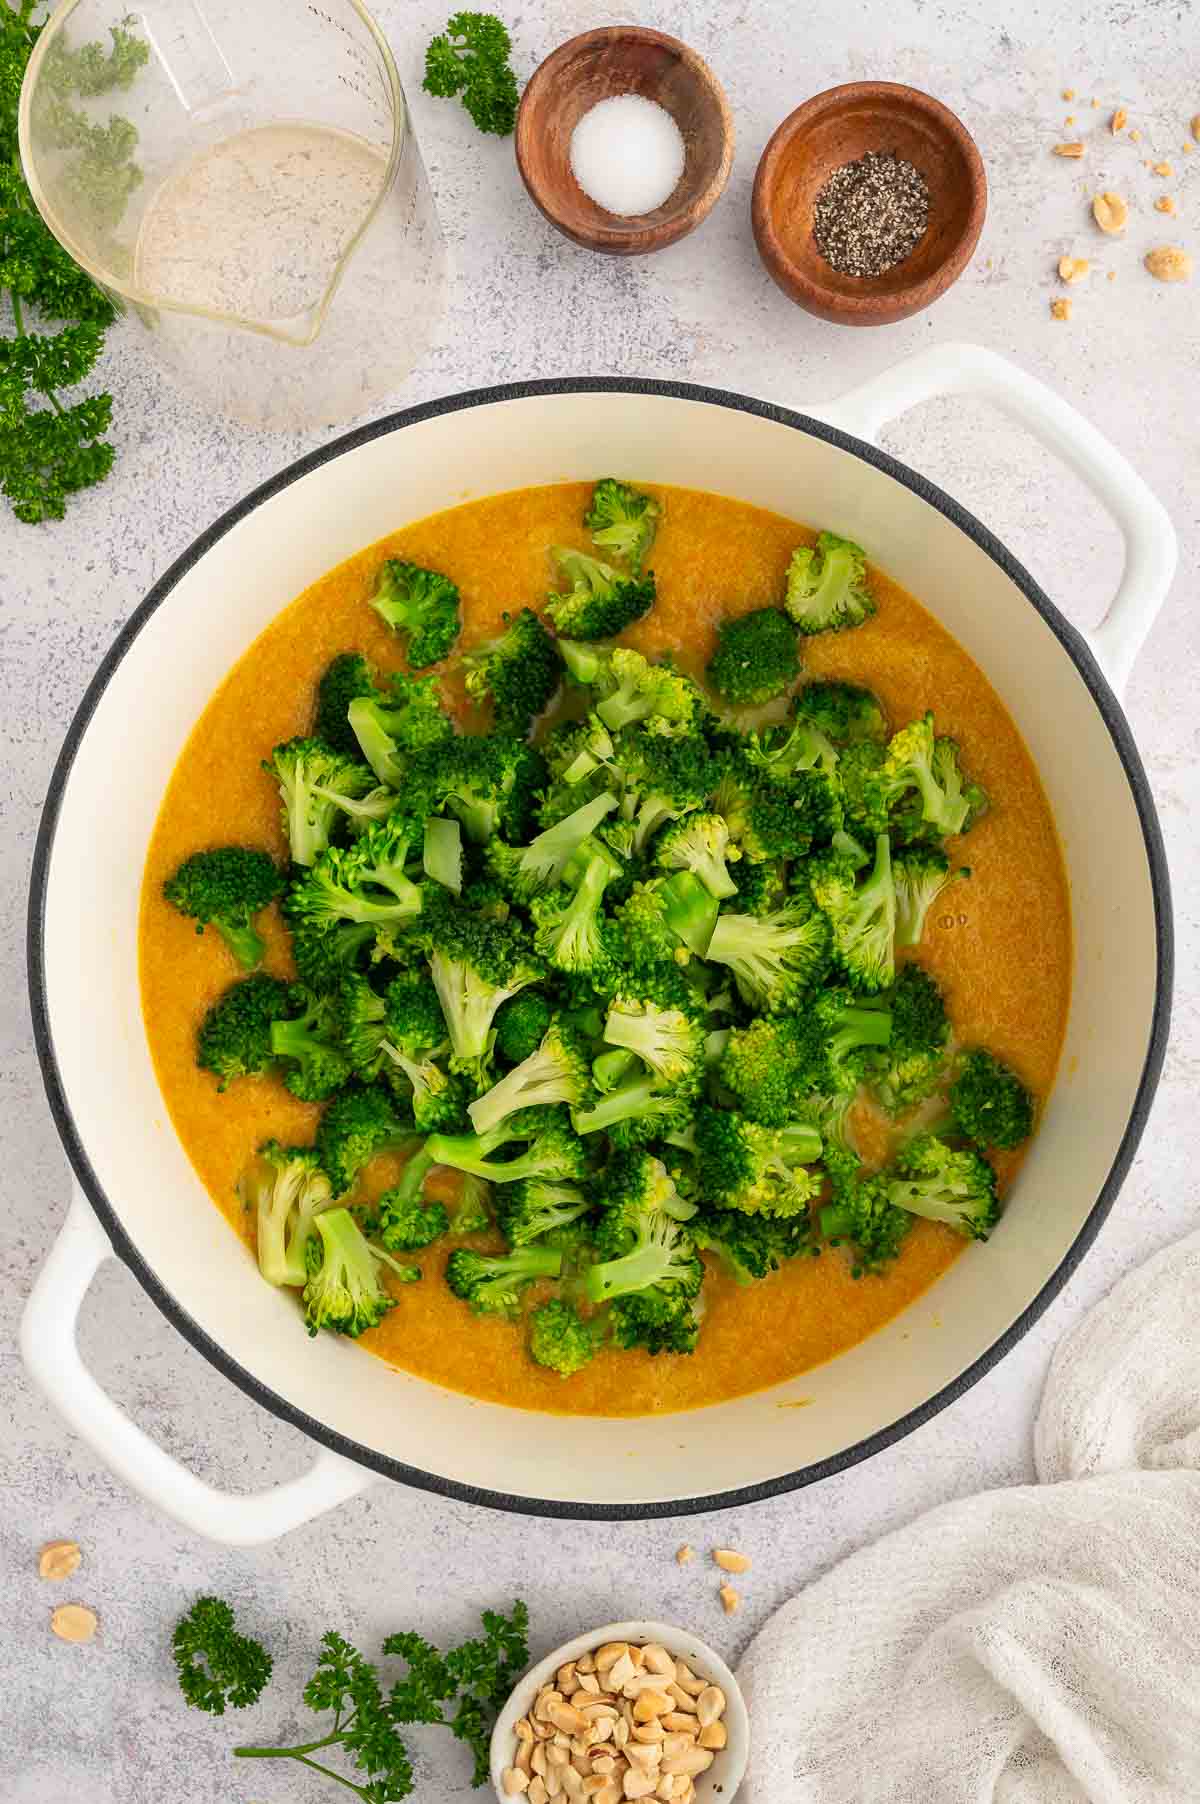 Broccoli and peanut butter soup being prepped with broccoli florets on top.